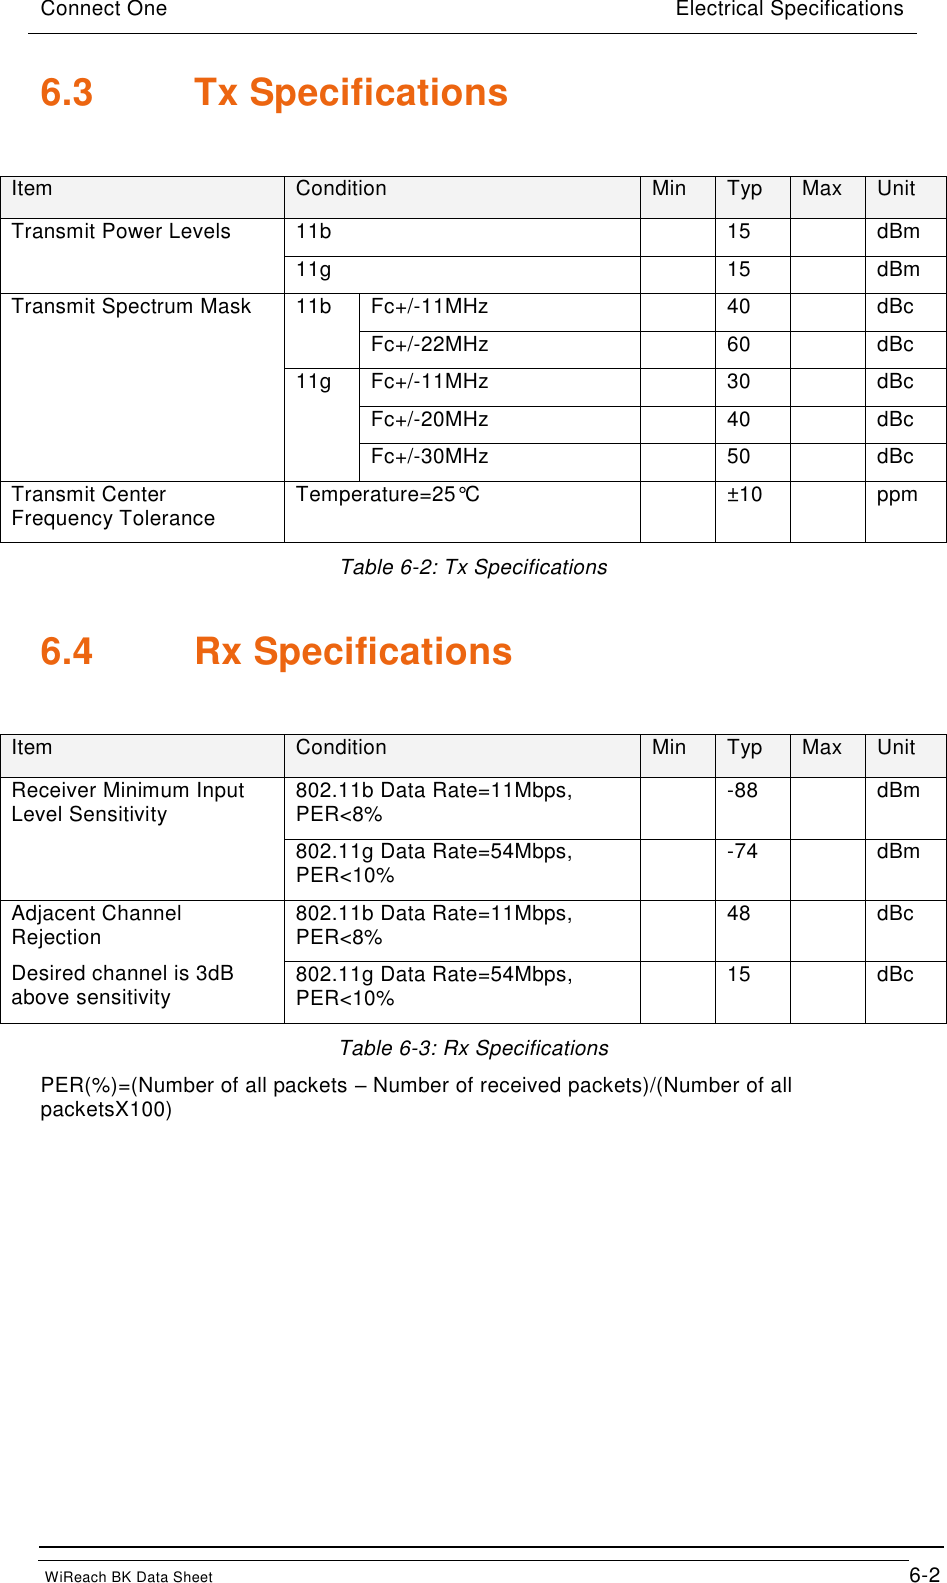 Connect One                                Electrical Specifications                                                    WiReach BK Data Sheet                                         6-2 6.3  Tx Specifications  Item Condition Min Typ Max Unit Transmit Power Levels 11b  15  dBm 11g  15  dBm Transmit Spectrum Mask  11b Fc+/-11MHz  40  dBc Fc+/-22MHz  60  dBc 11g Fc+/-11MHz  30  dBc Fc+/-20MHz  40  dBc Fc+/-30MHz  50  dBc Transmit Center Frequency Tolerance Temperature=25°C  ±10  ppm Table 6-2: Tx Specifications 6.4  Rx Specifications  Item Condition Min Typ Max Unit Receiver Minimum Input Level Sensitivity 802.11b Data Rate=11Mbps, PER&lt;8%  -88  dBm 802.11g Data Rate=54Mbps, PER&lt;10%  -74  dBm Adjacent Channel Rejection Desired channel is 3dB above sensitivity 802.11b Data Rate=11Mbps, PER&lt;8%  48  dBc 802.11g Data Rate=54Mbps, PER&lt;10%  15  dBc Table 6-3: Rx Specifications PER(%)=(Number of all packets – Number of received packets)/(Number of all packetsX100) 